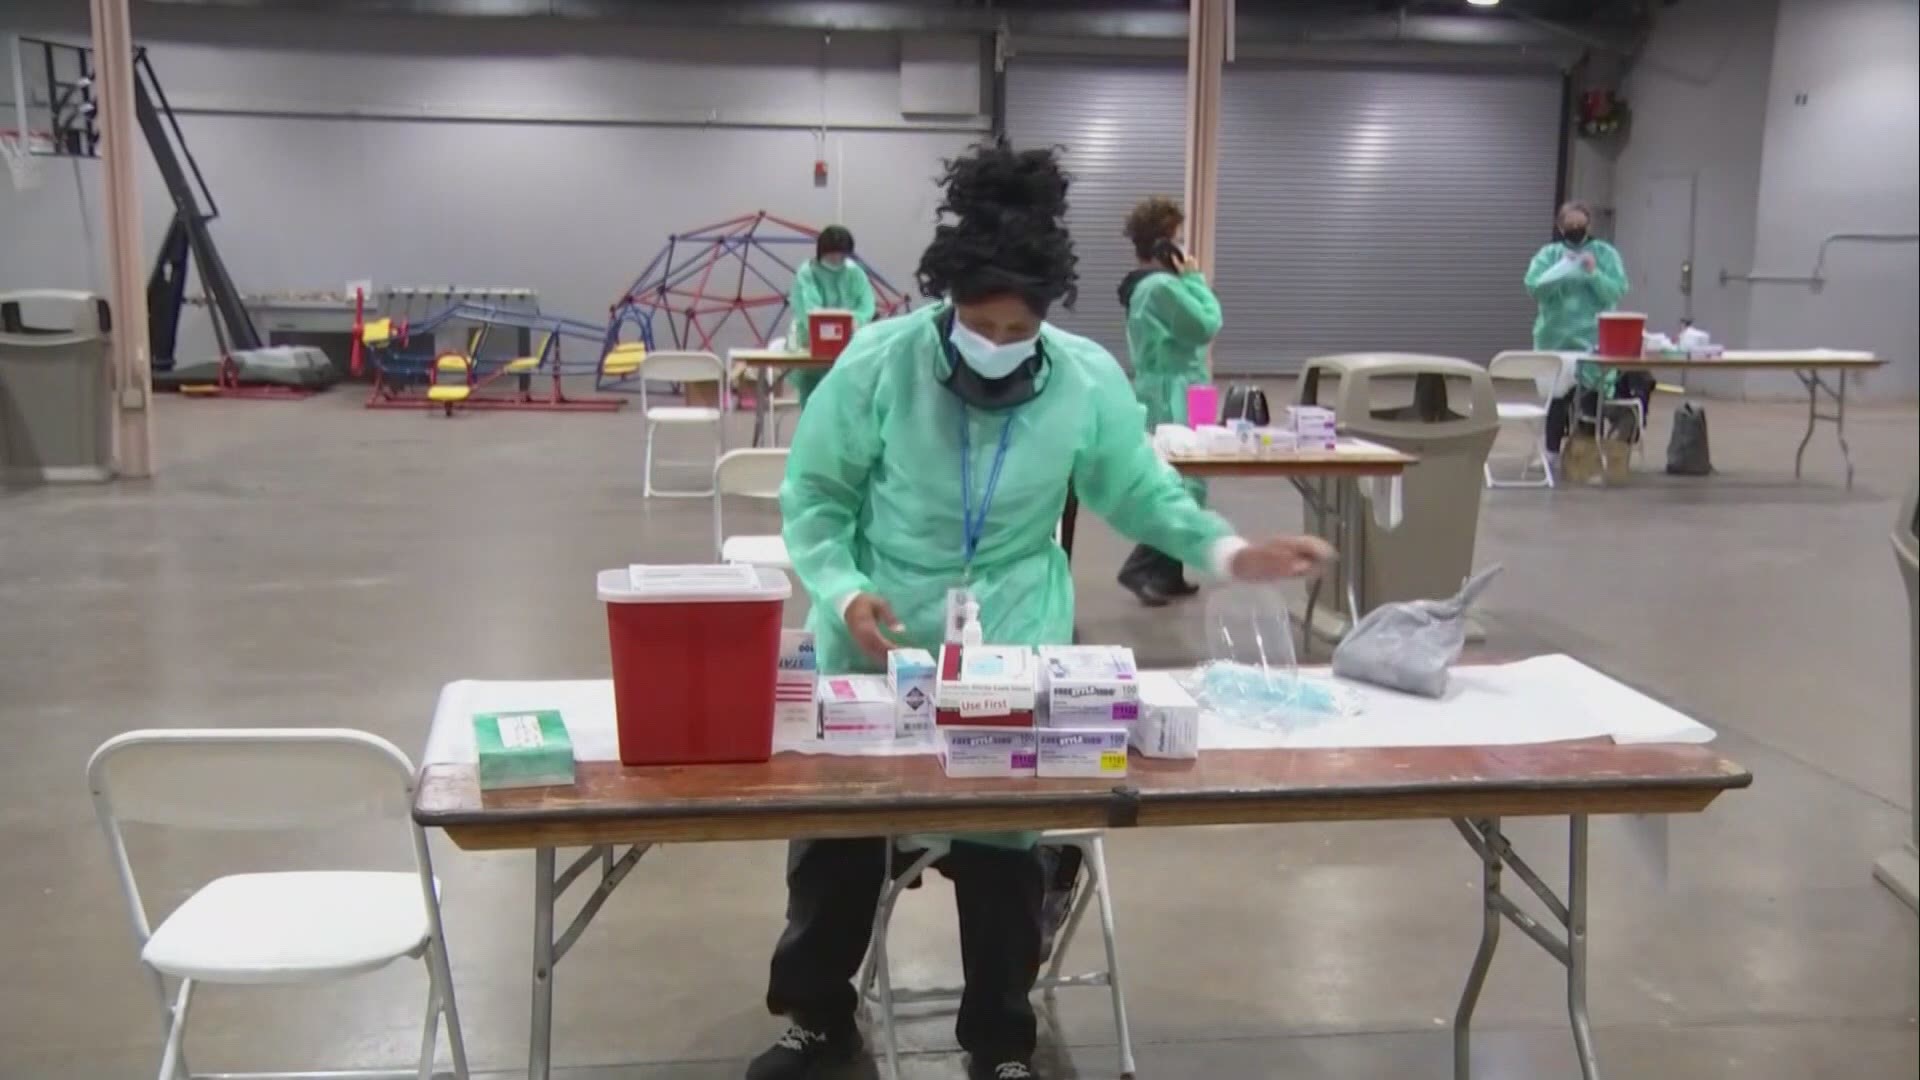 More than 300,000 residents are on the waiting list to get vaccinated in Dallas County.